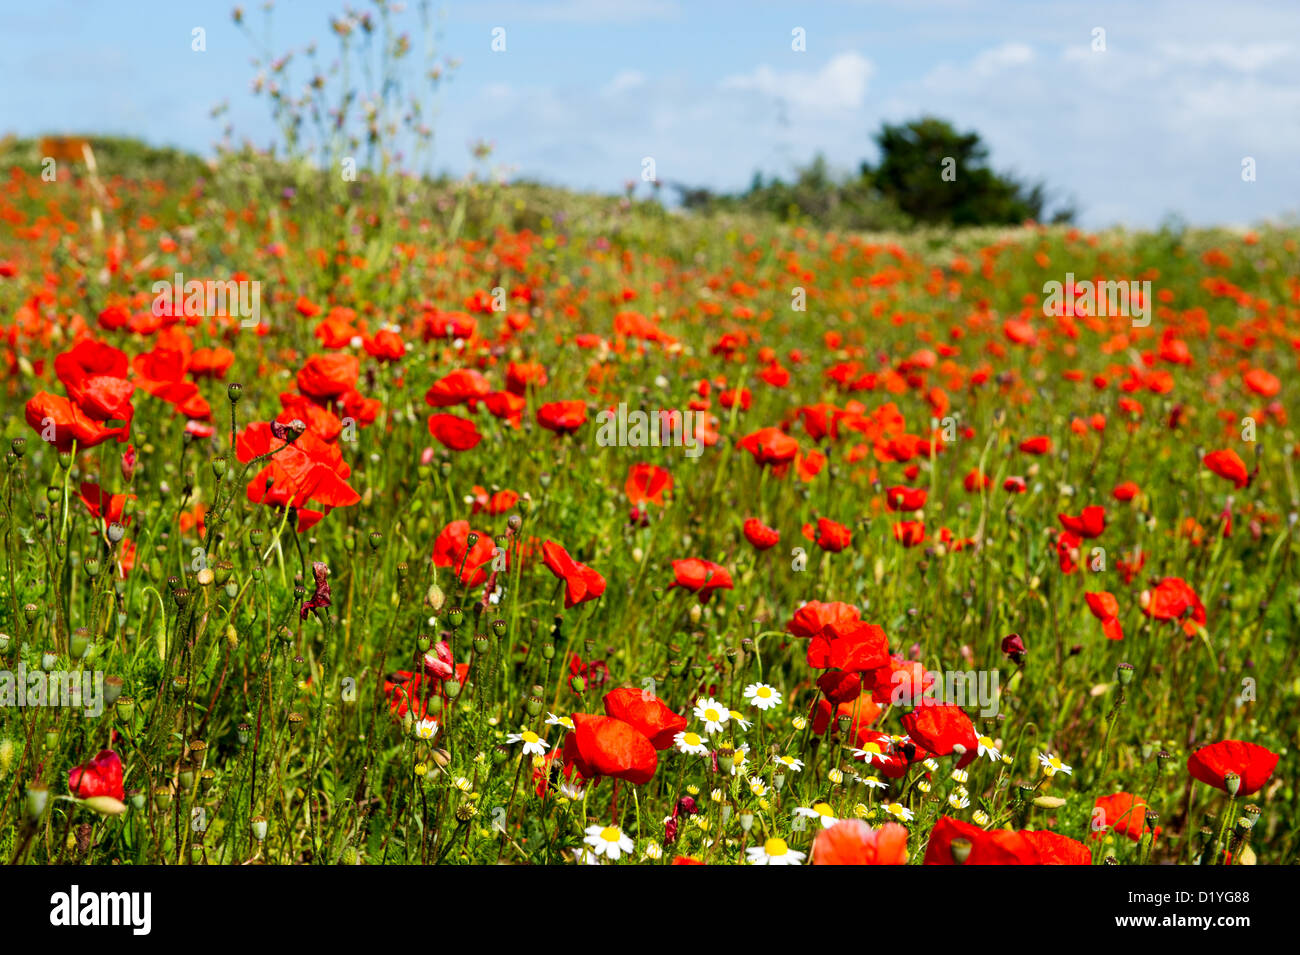 Fields with red poppies and other wild flowers Stock Photo